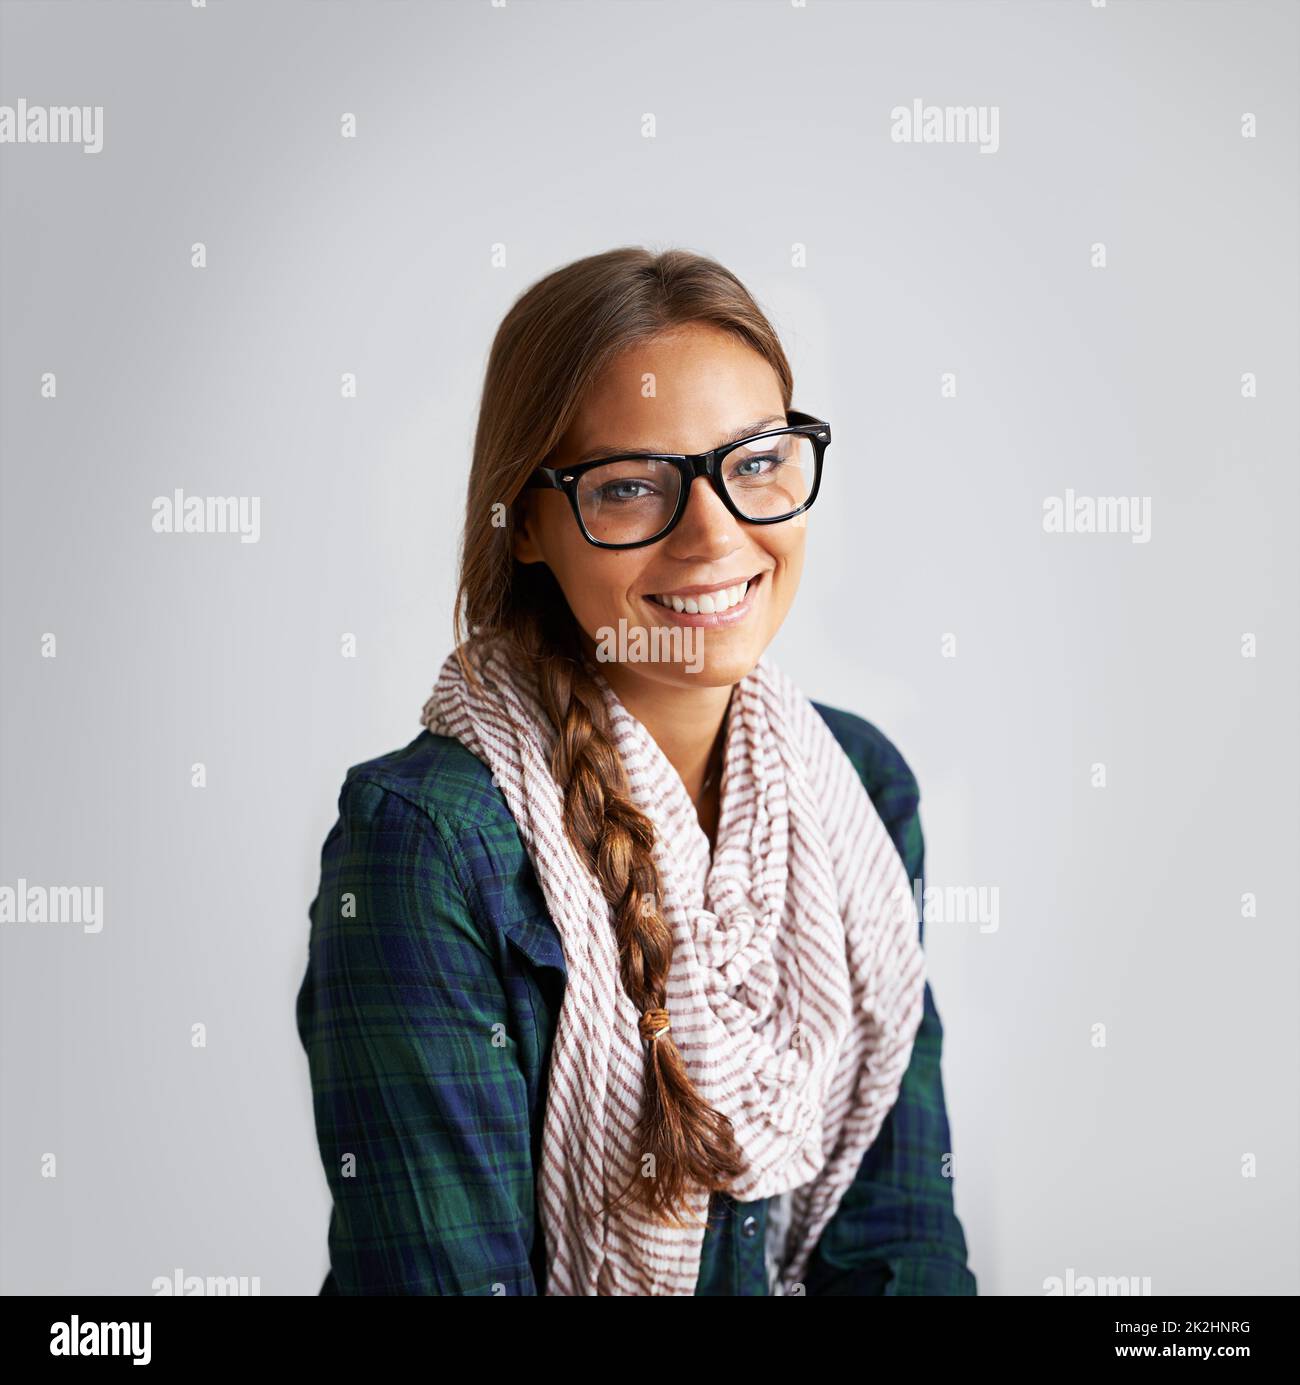 Cheerful Pretty Girl Wearing Glasses. Isolated Stock Image - Image of  female, brunette: 129367037